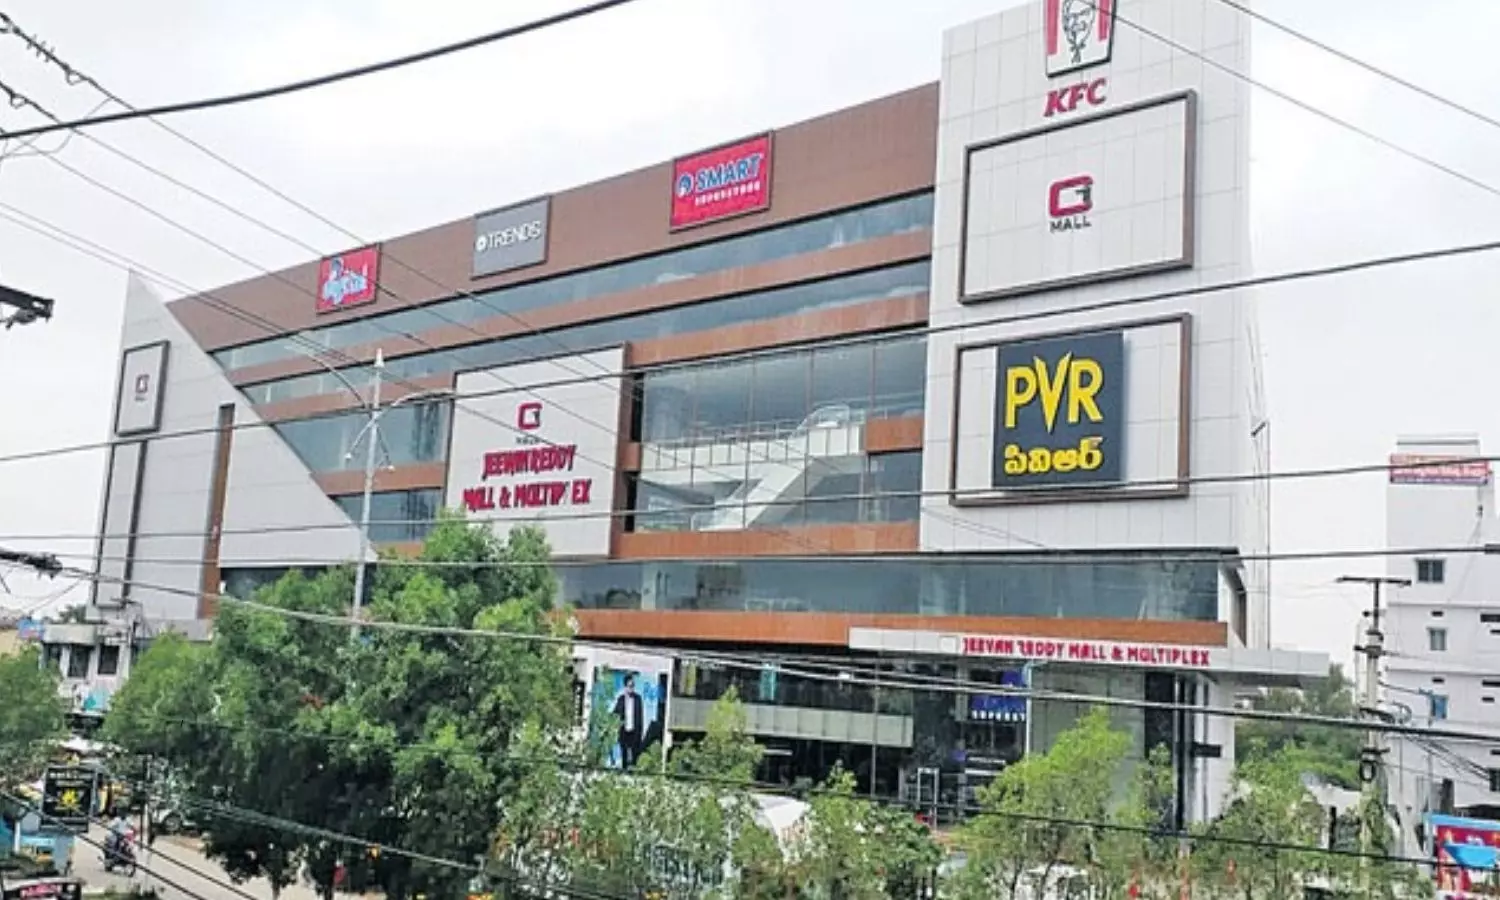 Notices for Jeevan Reddy Mall in Armour